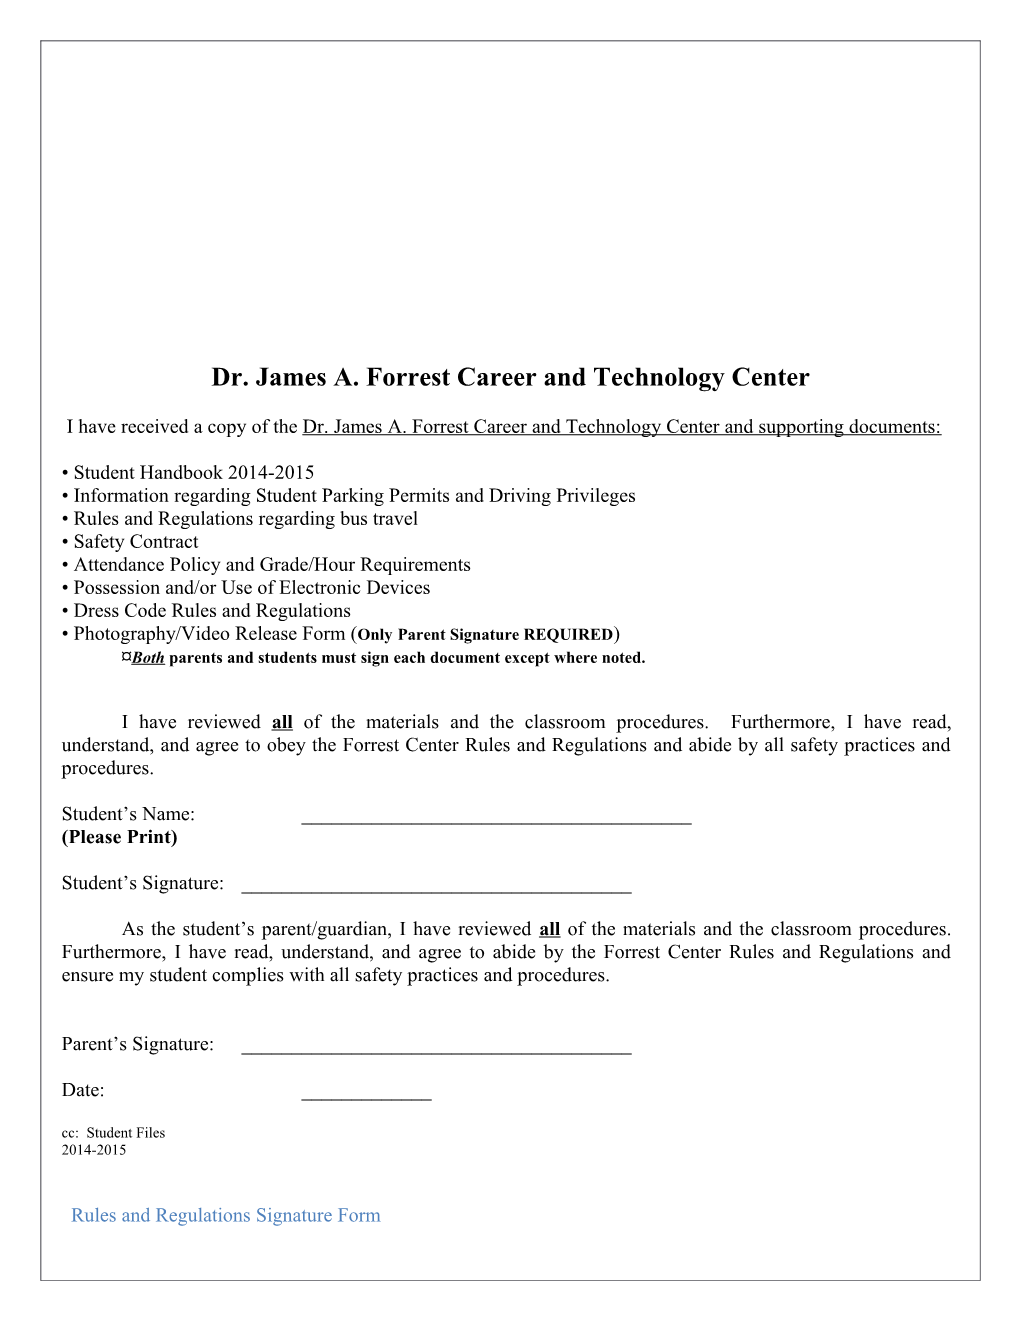 Dr. James A. Forrest Career and Technology Center